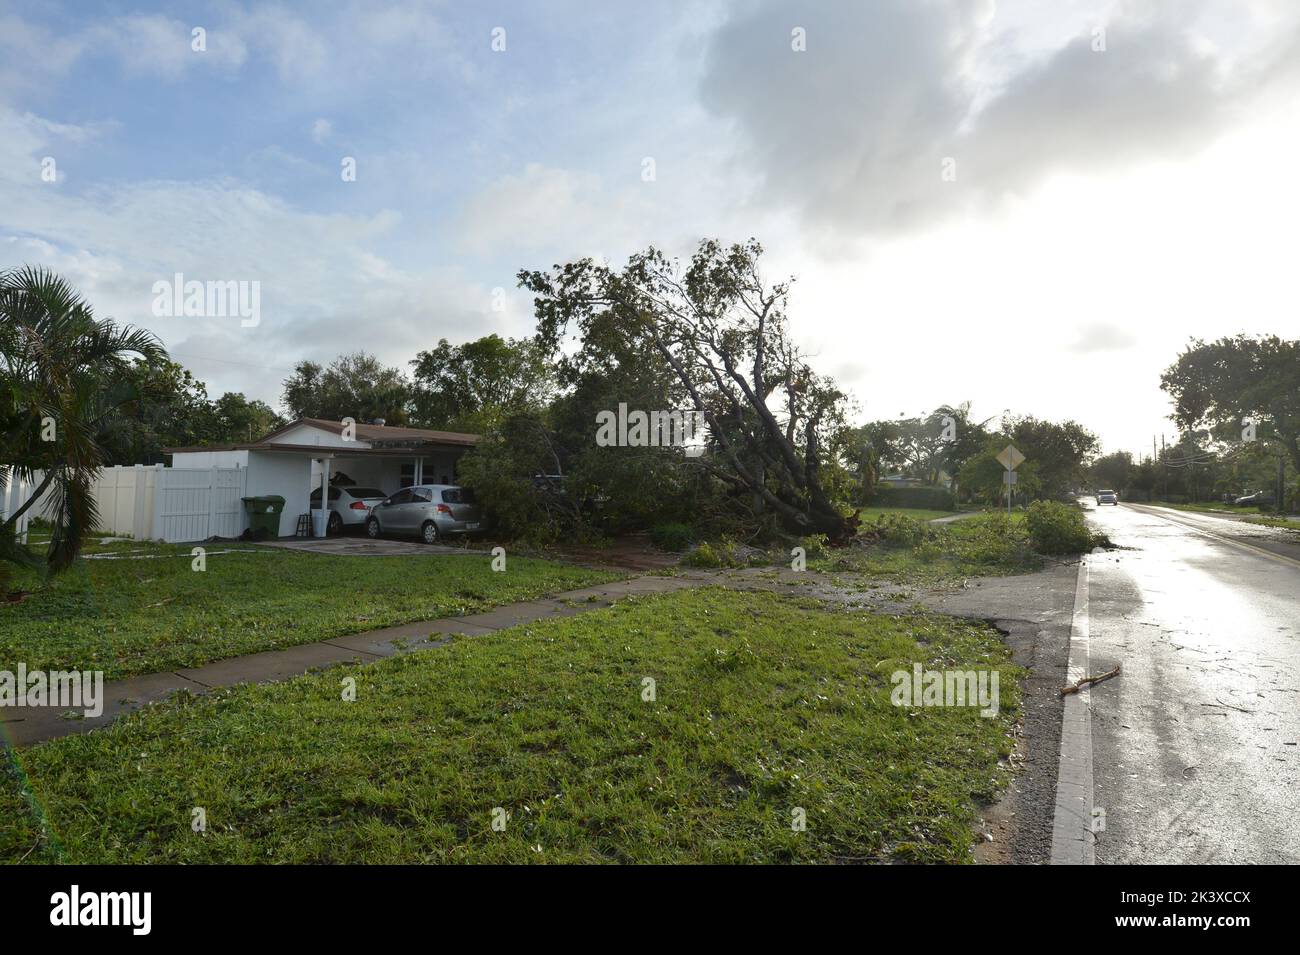 FORT LAUDERDALE, FL - SEPTEMBER 22, 2022: Hurricane Ian makes landfall in Florida as dangerous Category 4 hurricane. Historic File photos of Hurricanes in South Florida People: Hurricane Destruction Credit: Storms Media Group/Alamy Live News Stock Photo